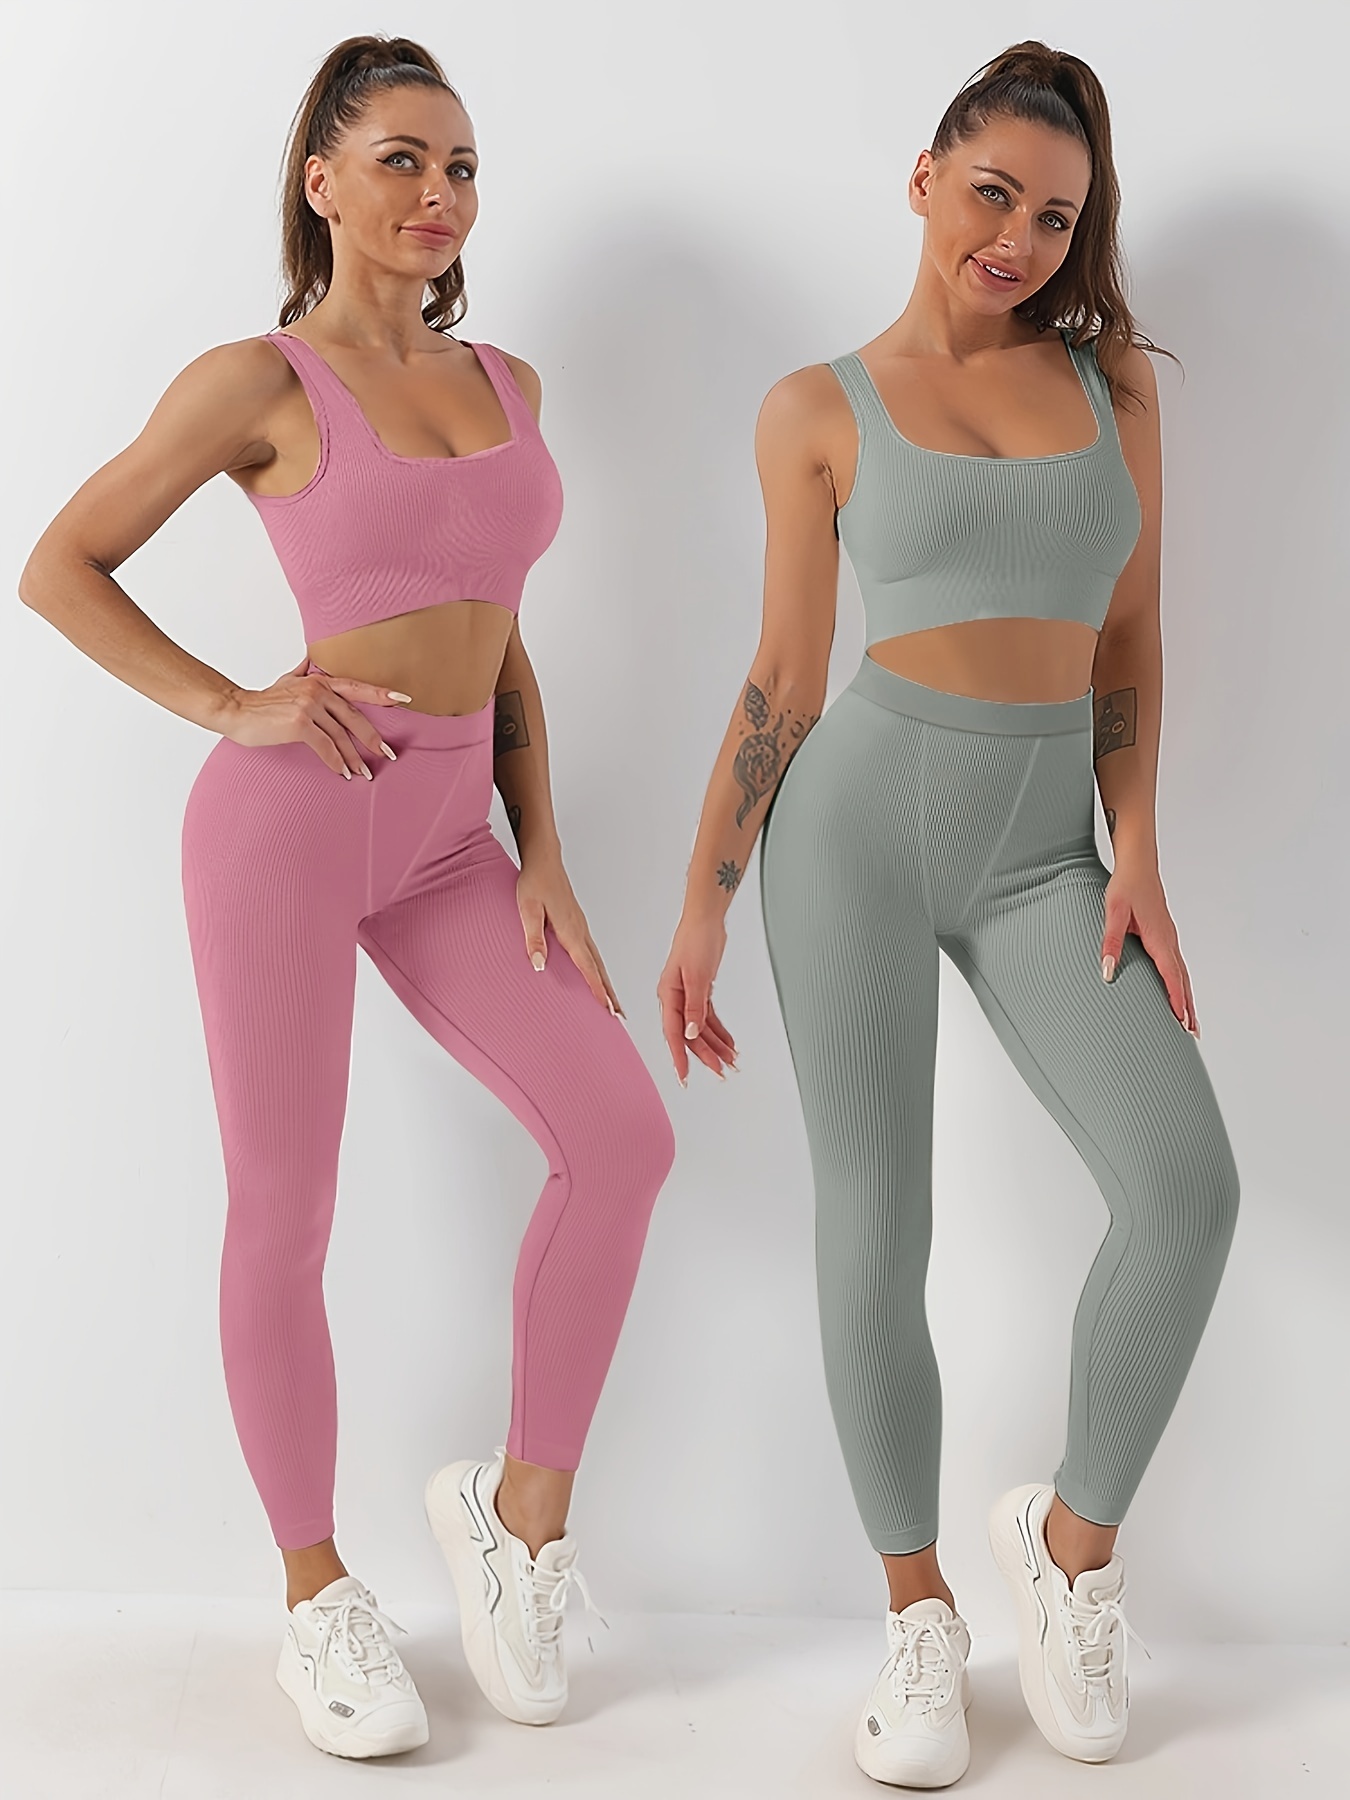 Polyester Lycra Padded Women's Workout Set - Leggings And Sports